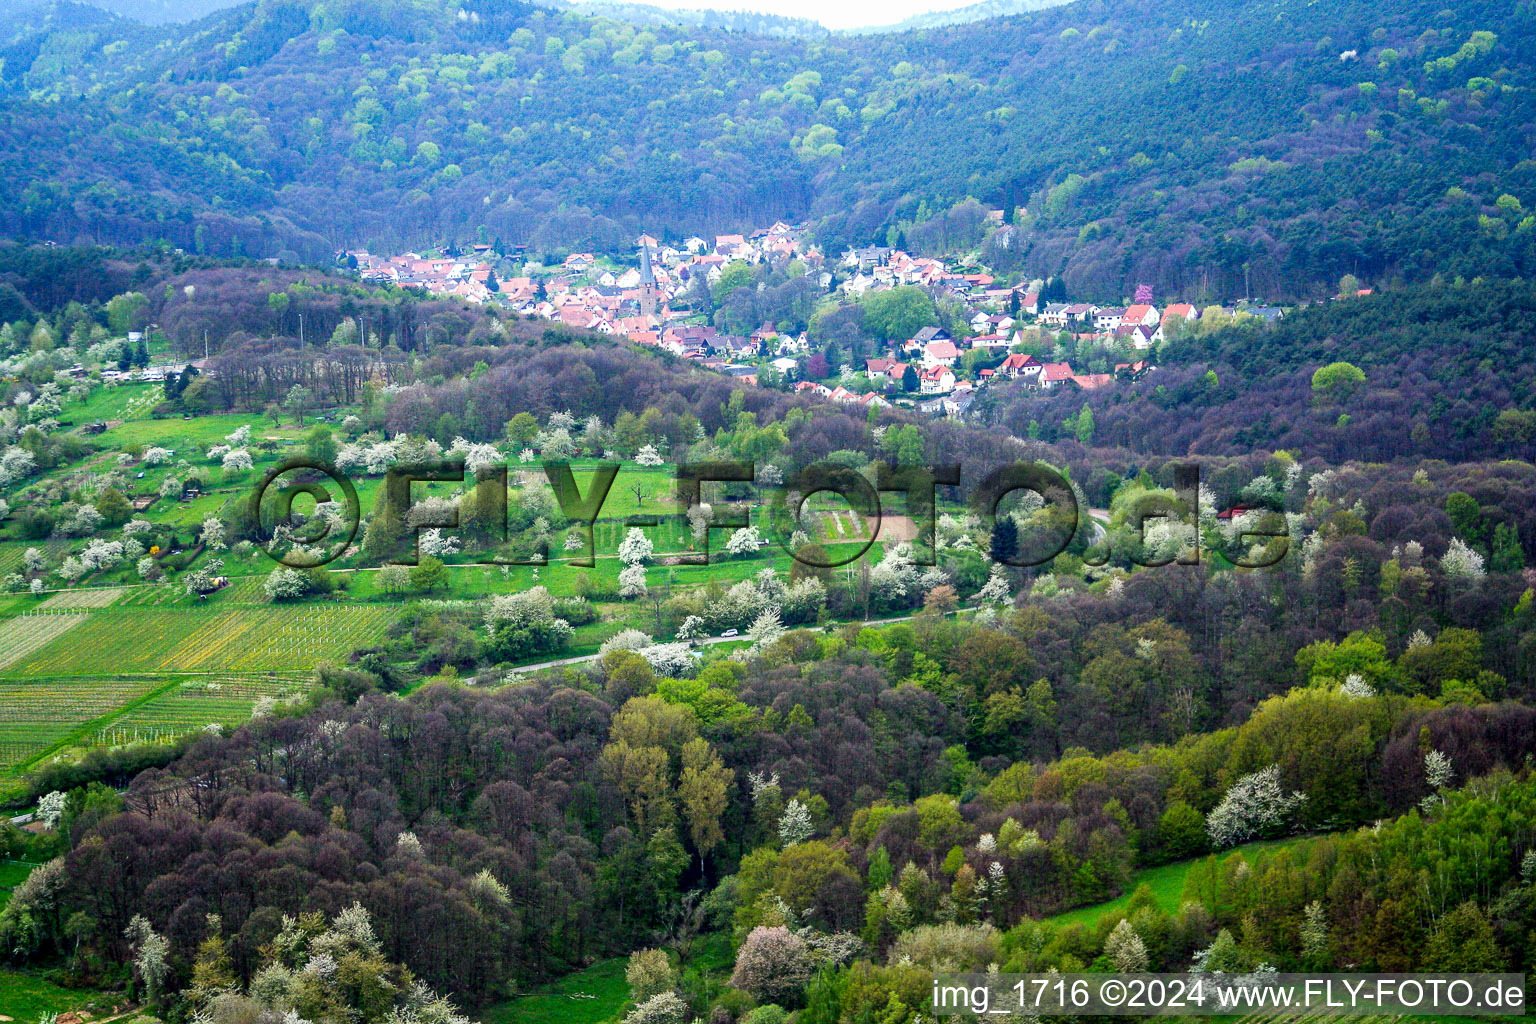 Village - view on the edge of agricultural fields and farmland in Doerrenbach in the state Rhineland-Palatinate